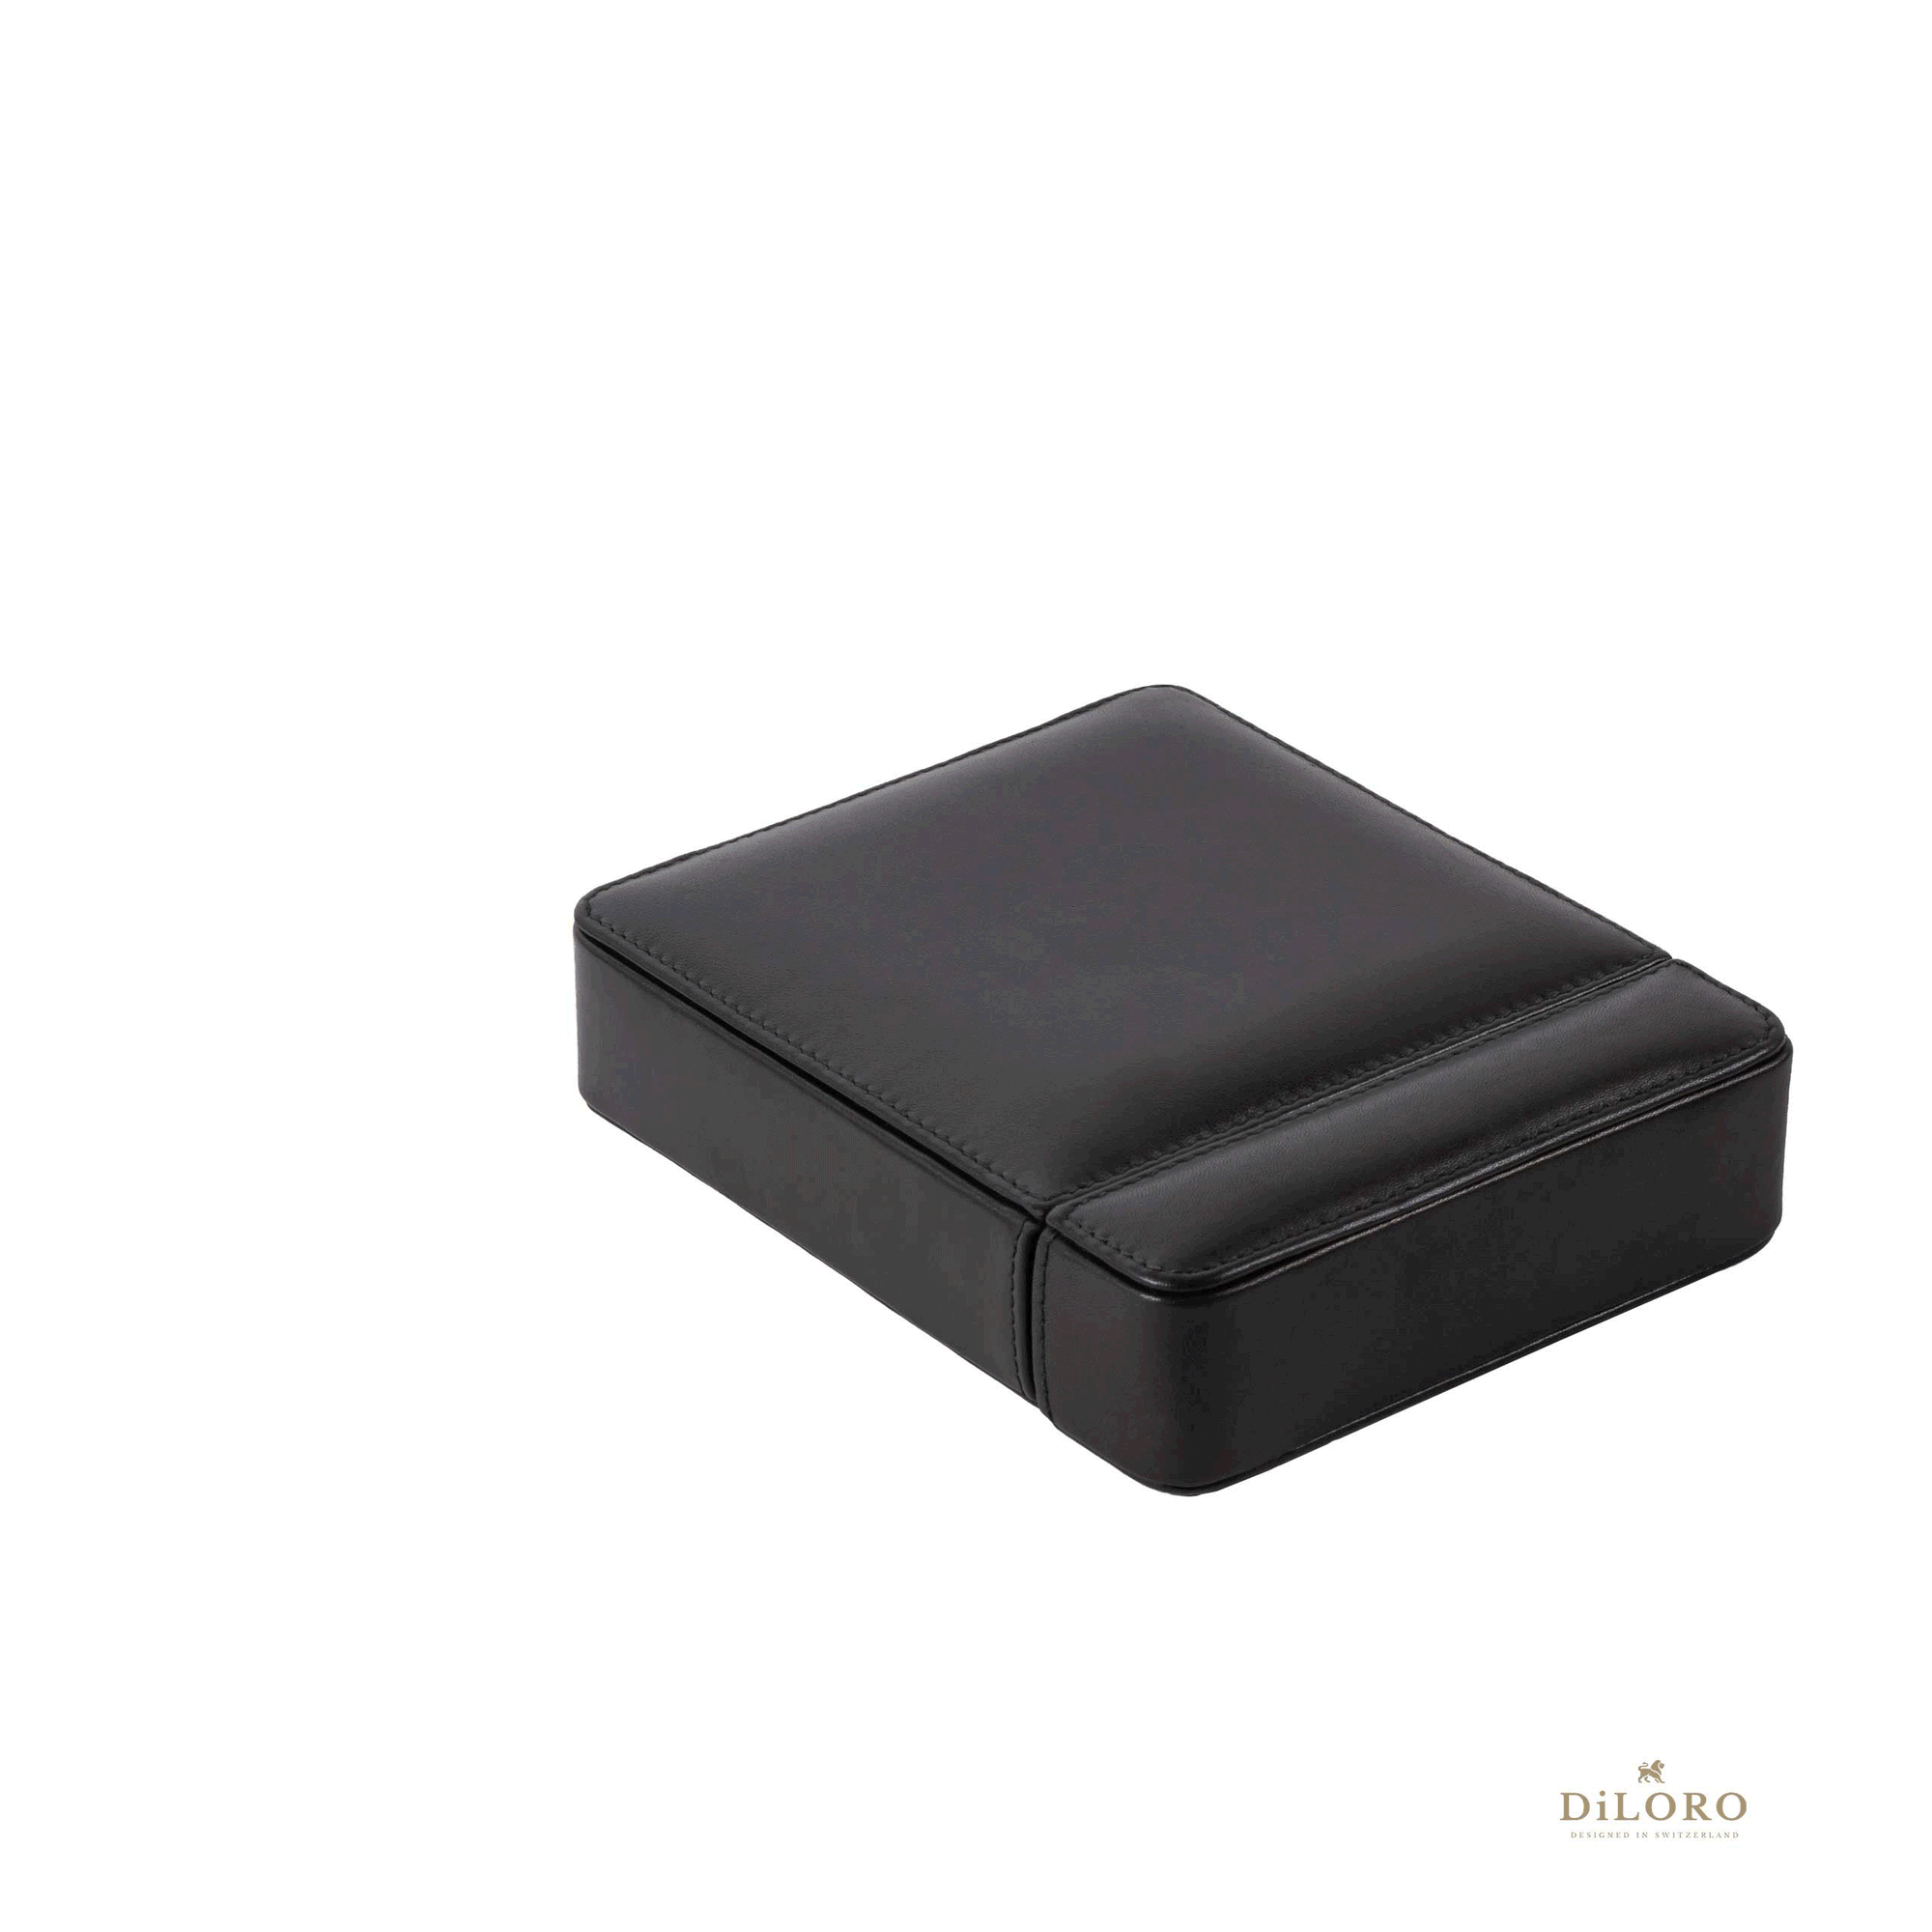 DiLoro Italian Leather Double Travel Watch Box Case Holder in Black - Animation Open - Close